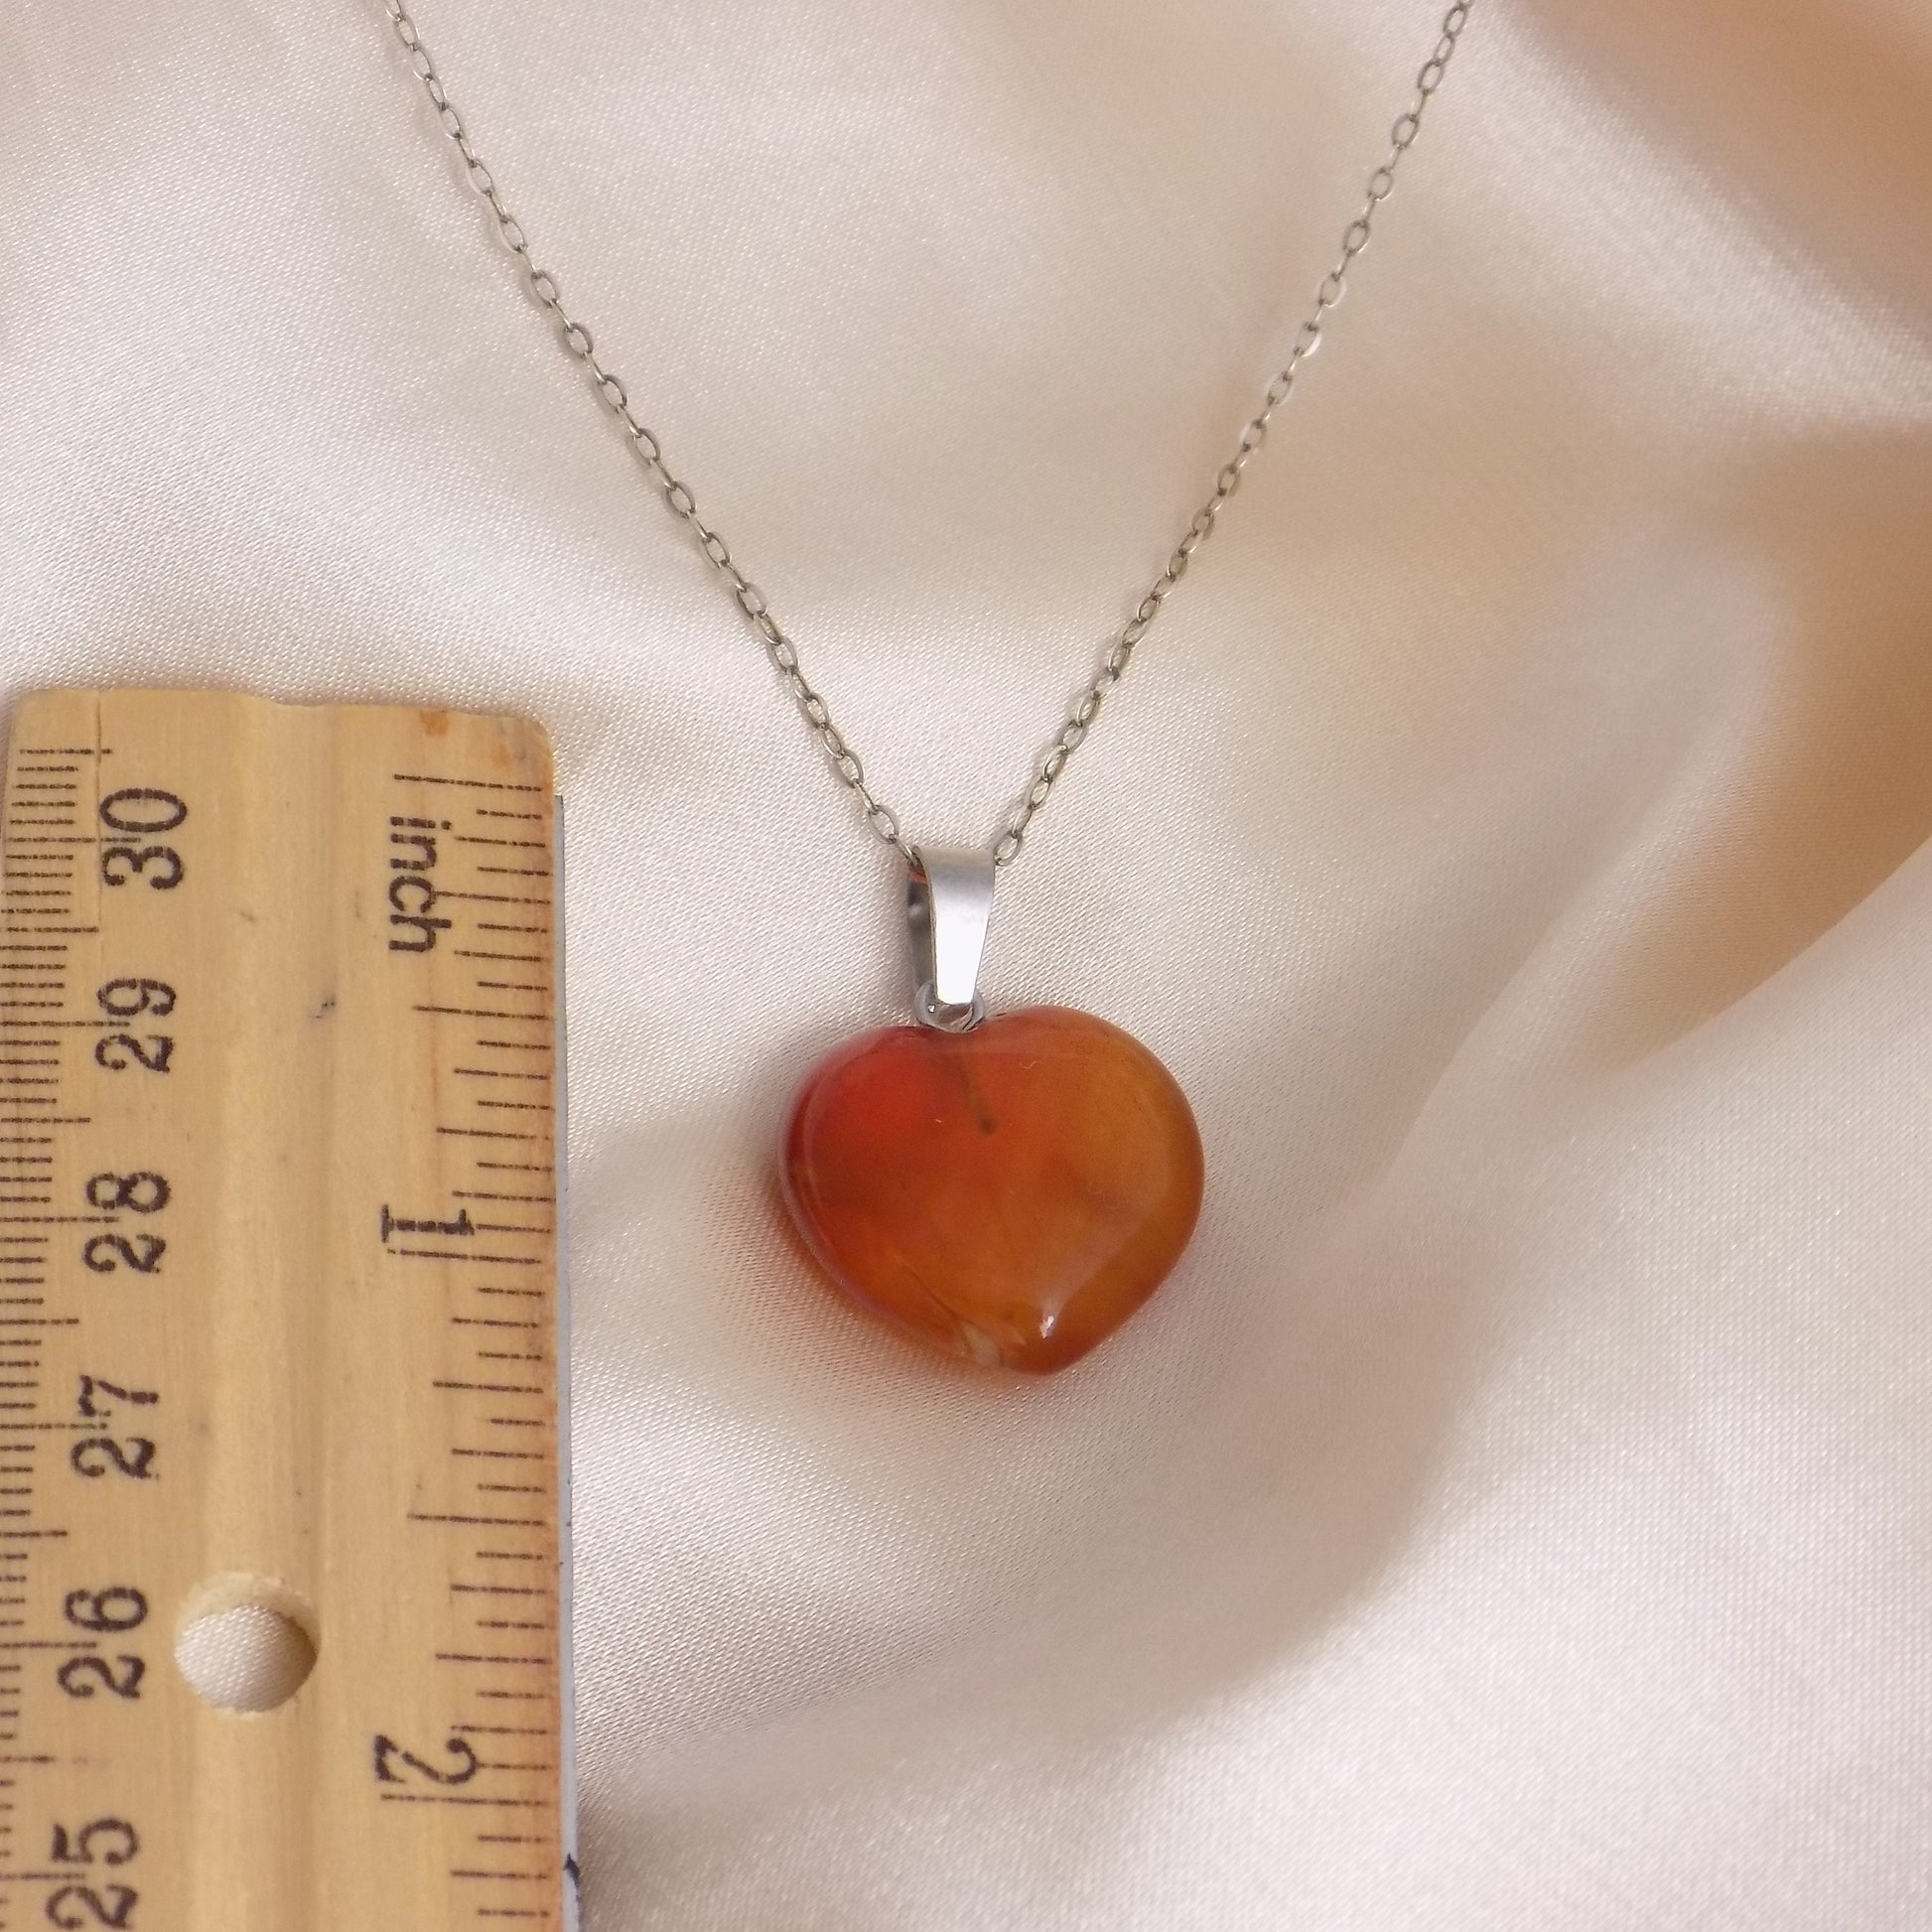 Carnelian Gemstone Necklace Silver, Heart Shaped Crystal For Layering, Boho Gifts For Her, M7-110